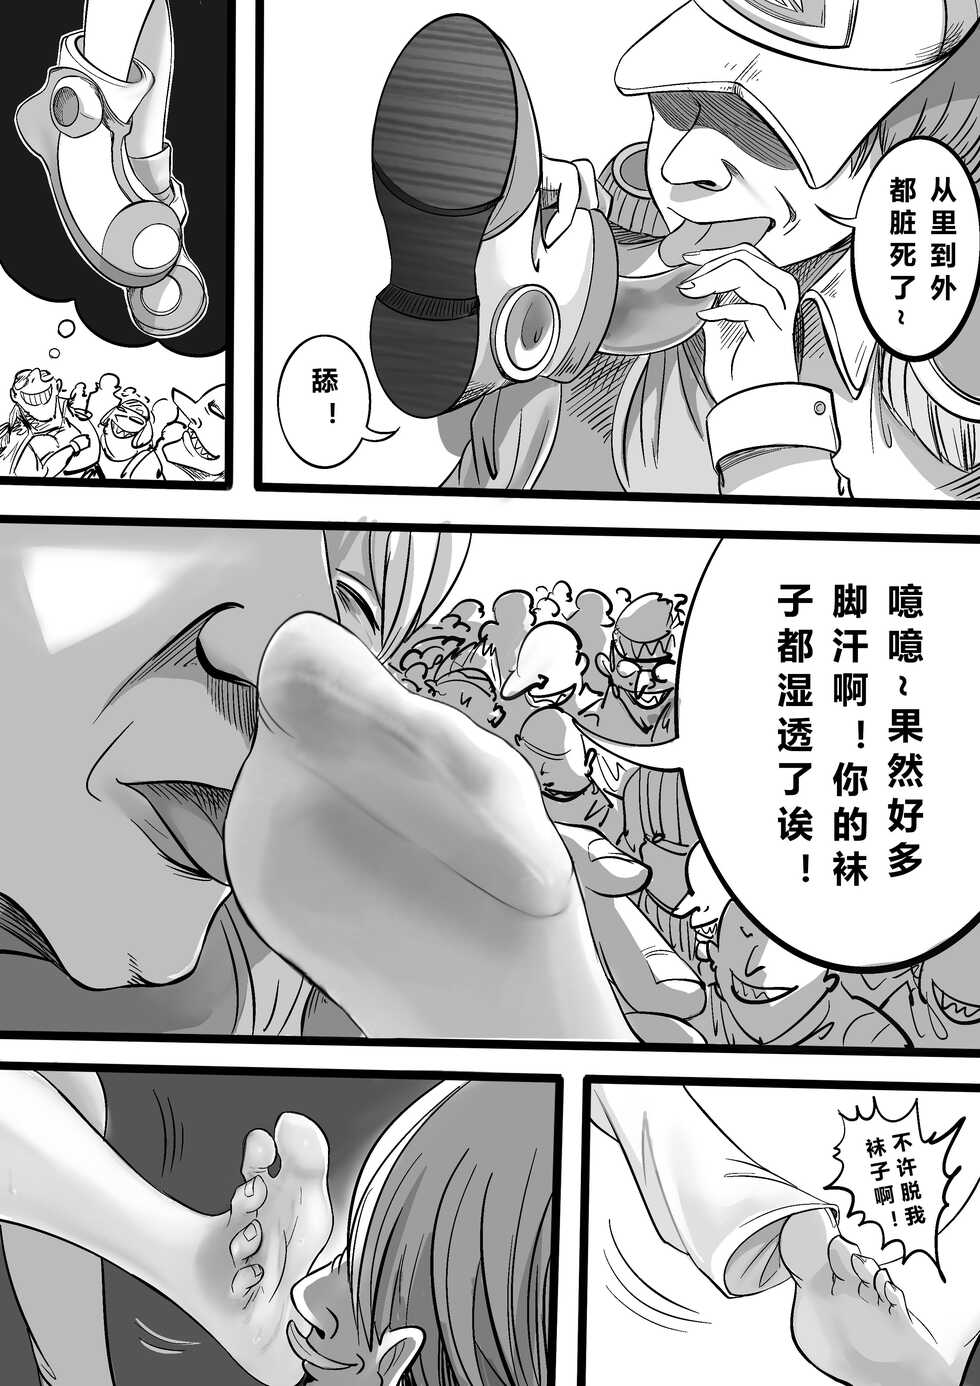 [Min] ONE PIECE Uta's Witch's Confinement Arc (One Piece) [Chinese] - Page 5